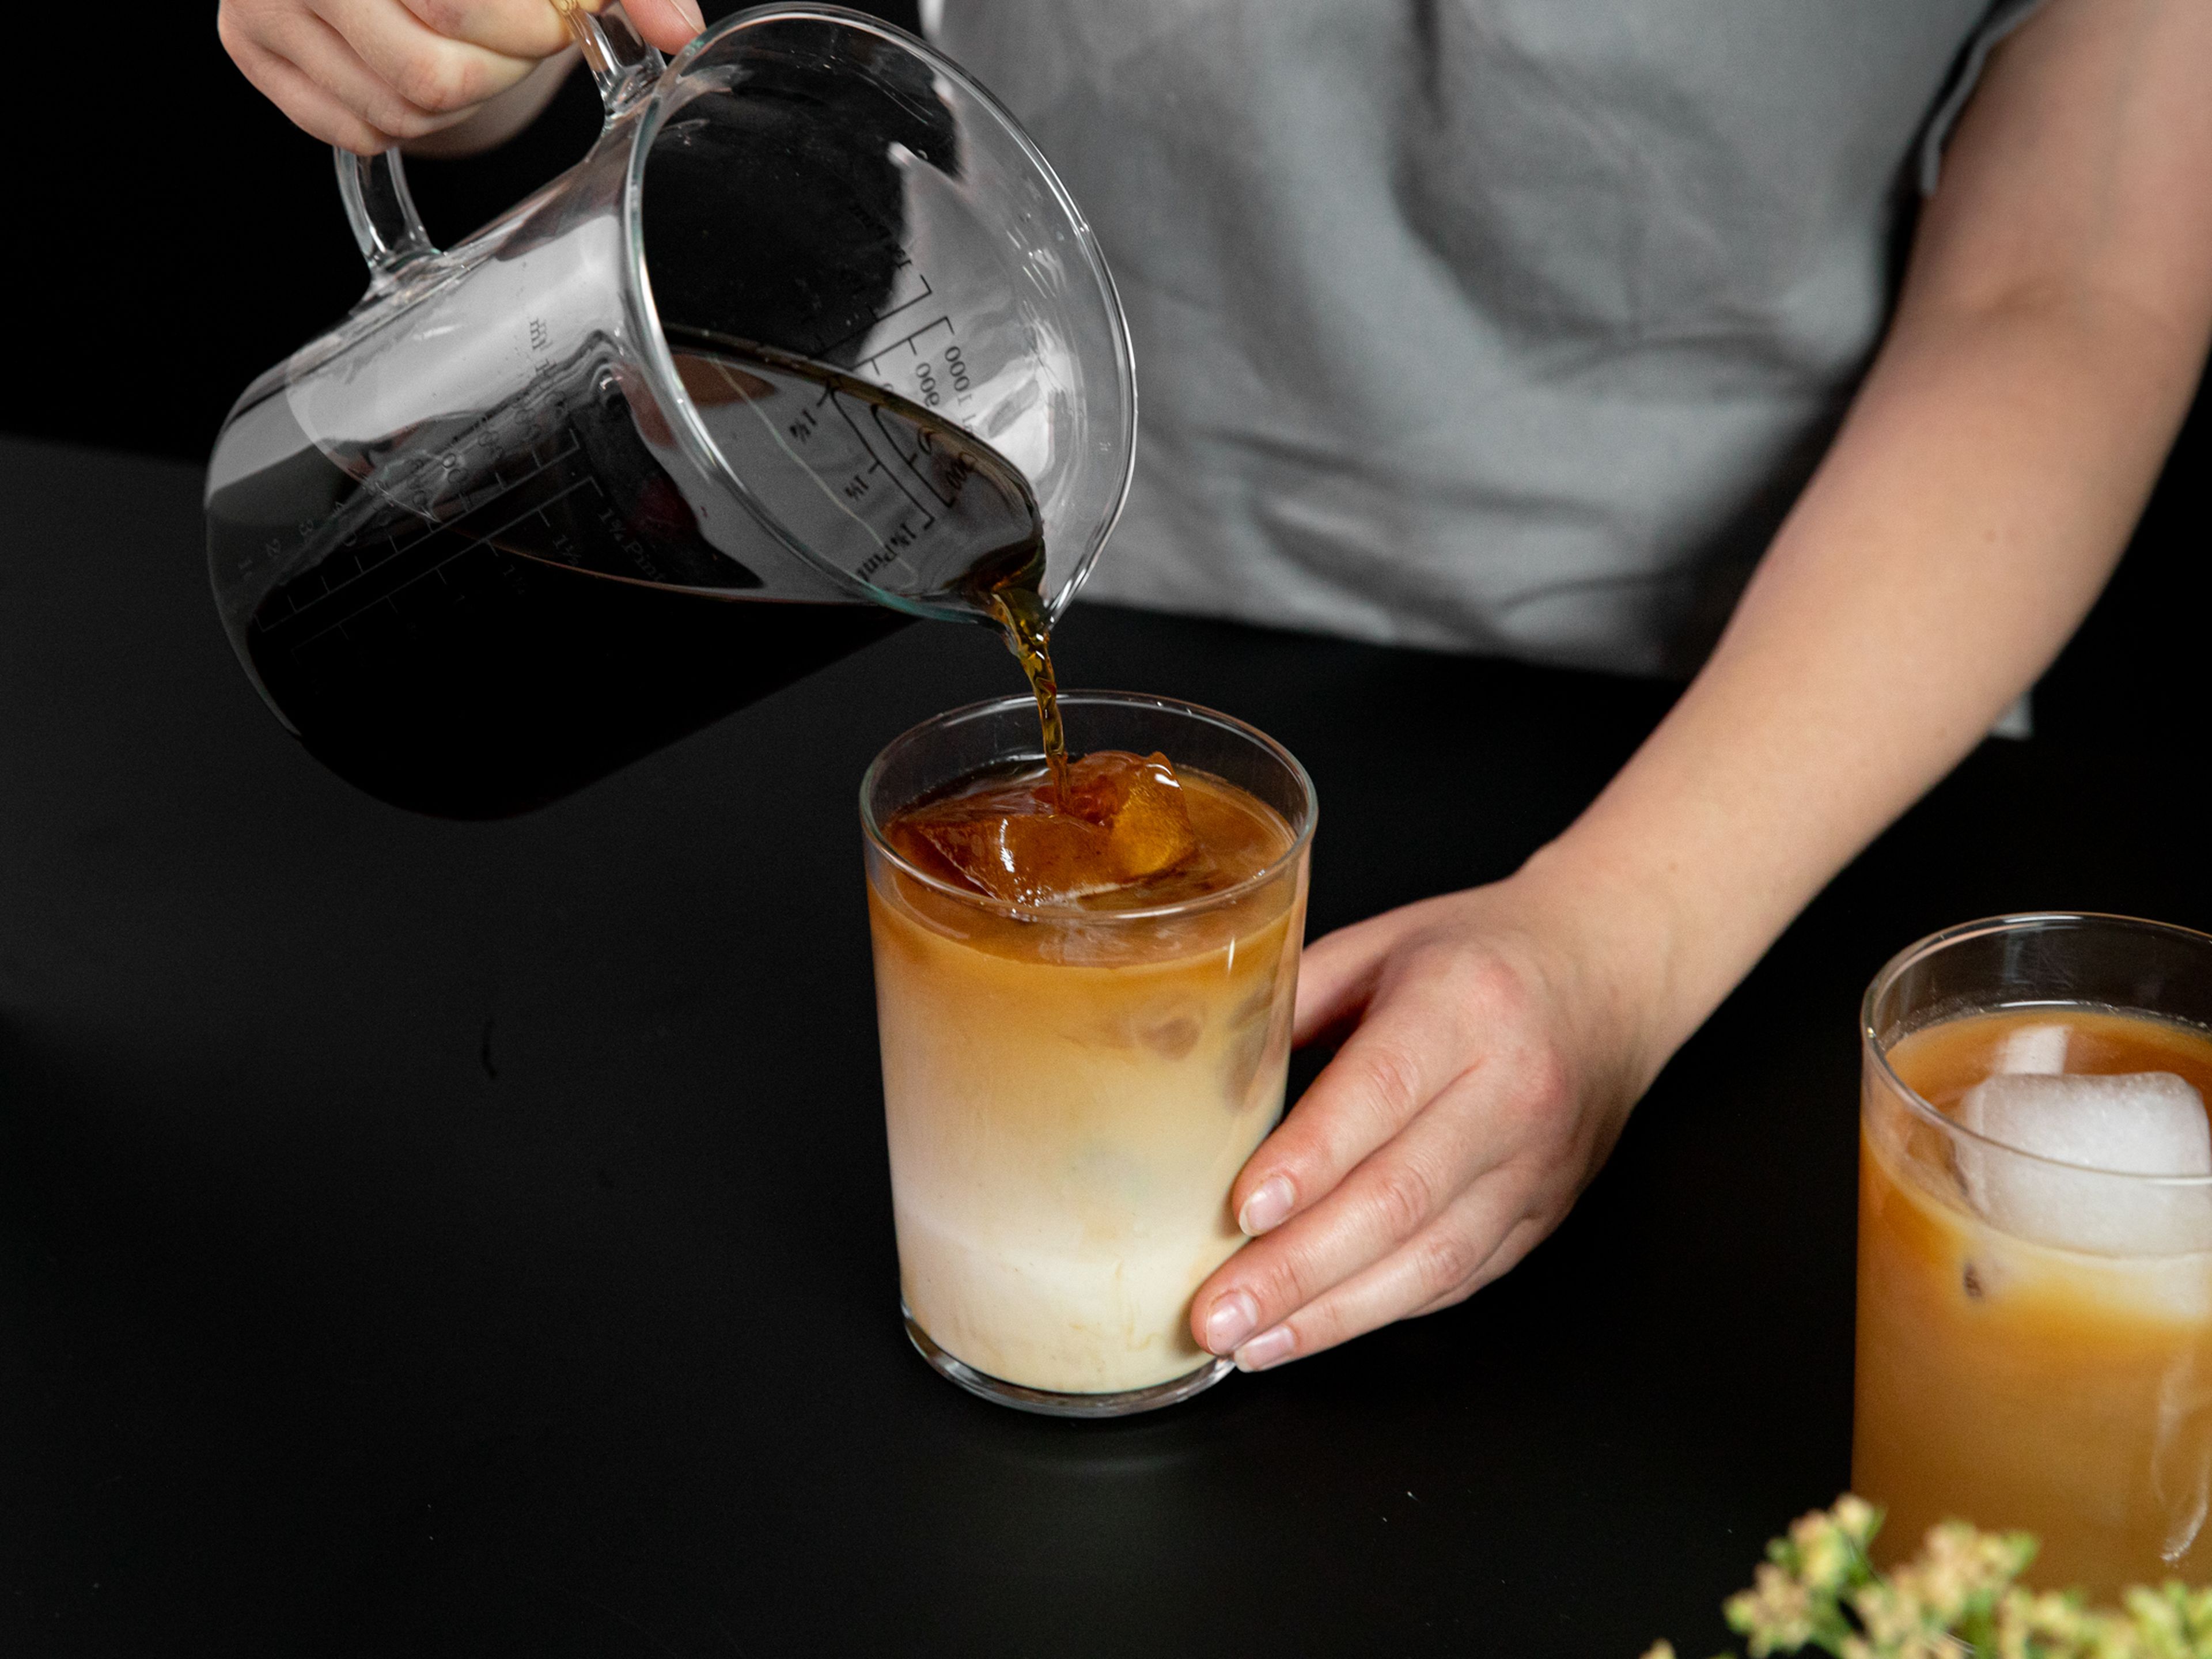 For cold brew ice cubes, add most of the cold brew to ice cube trays and freeze until solid. Add cold brew ice cubes, milk, and some extra cold brew to a glass and enjoy.